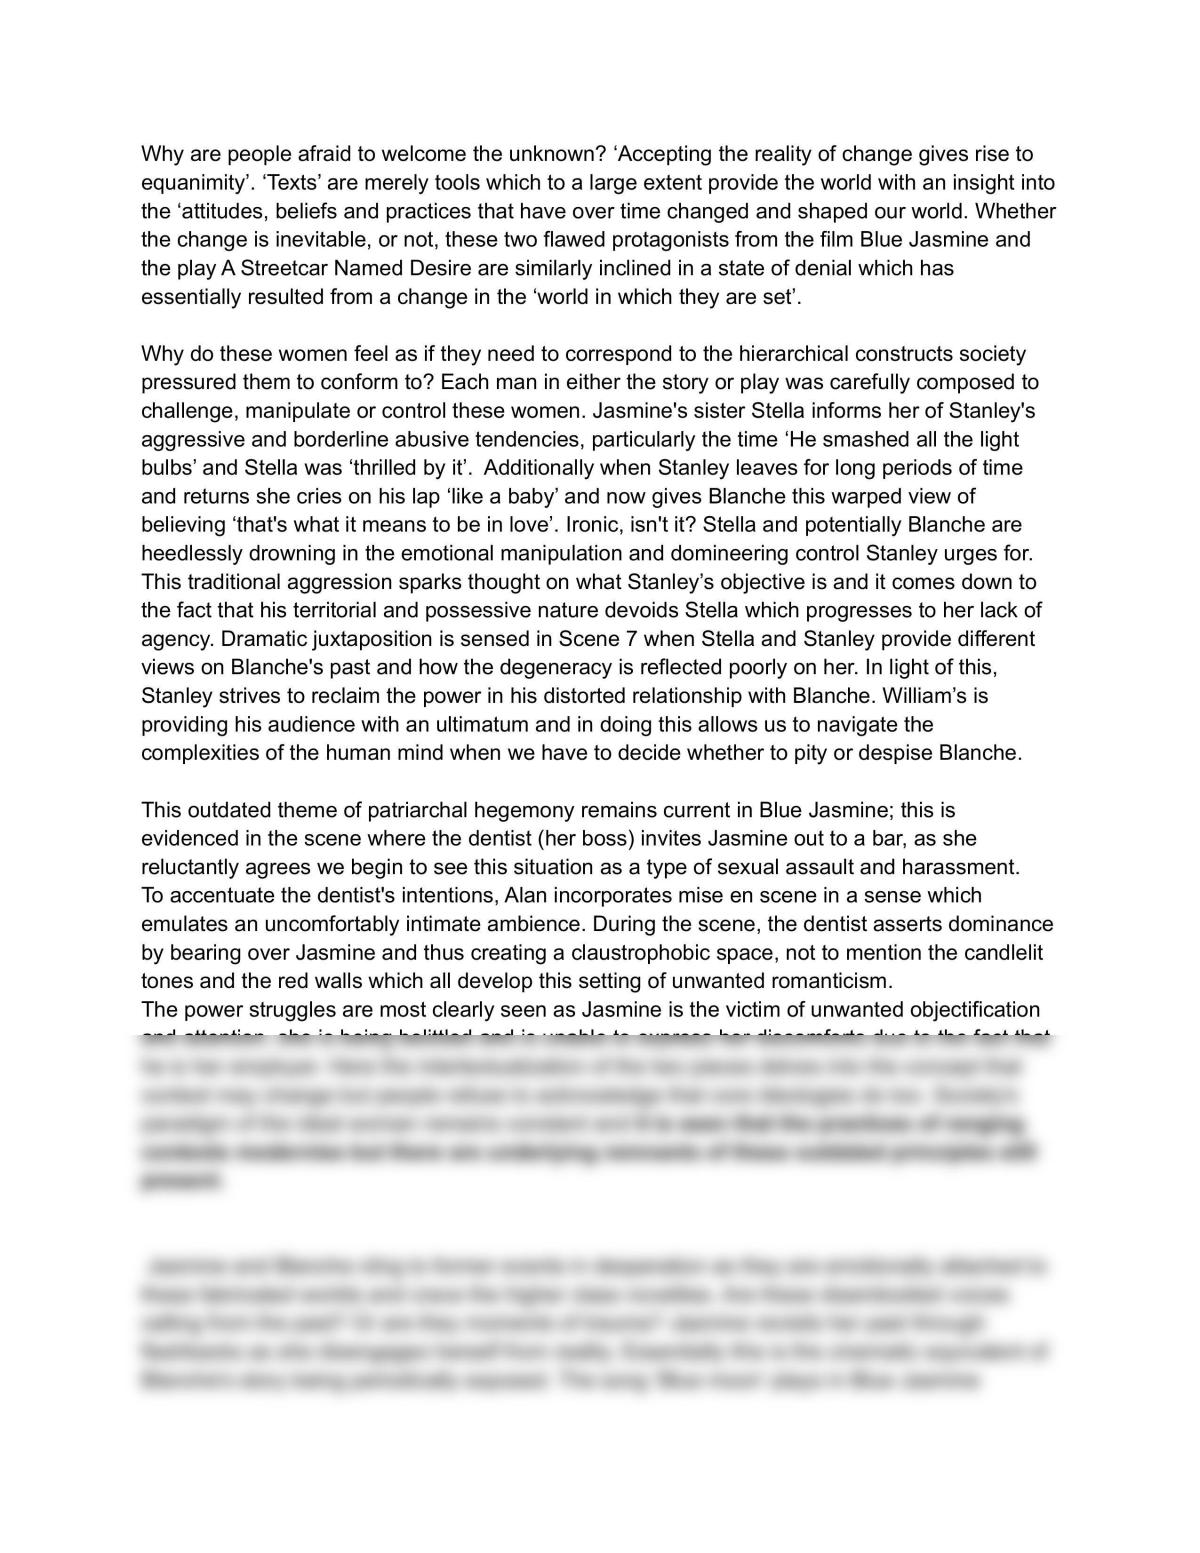 Comparative Essay; Blue Jasmine and a Streetcar Named Desire - Page 1